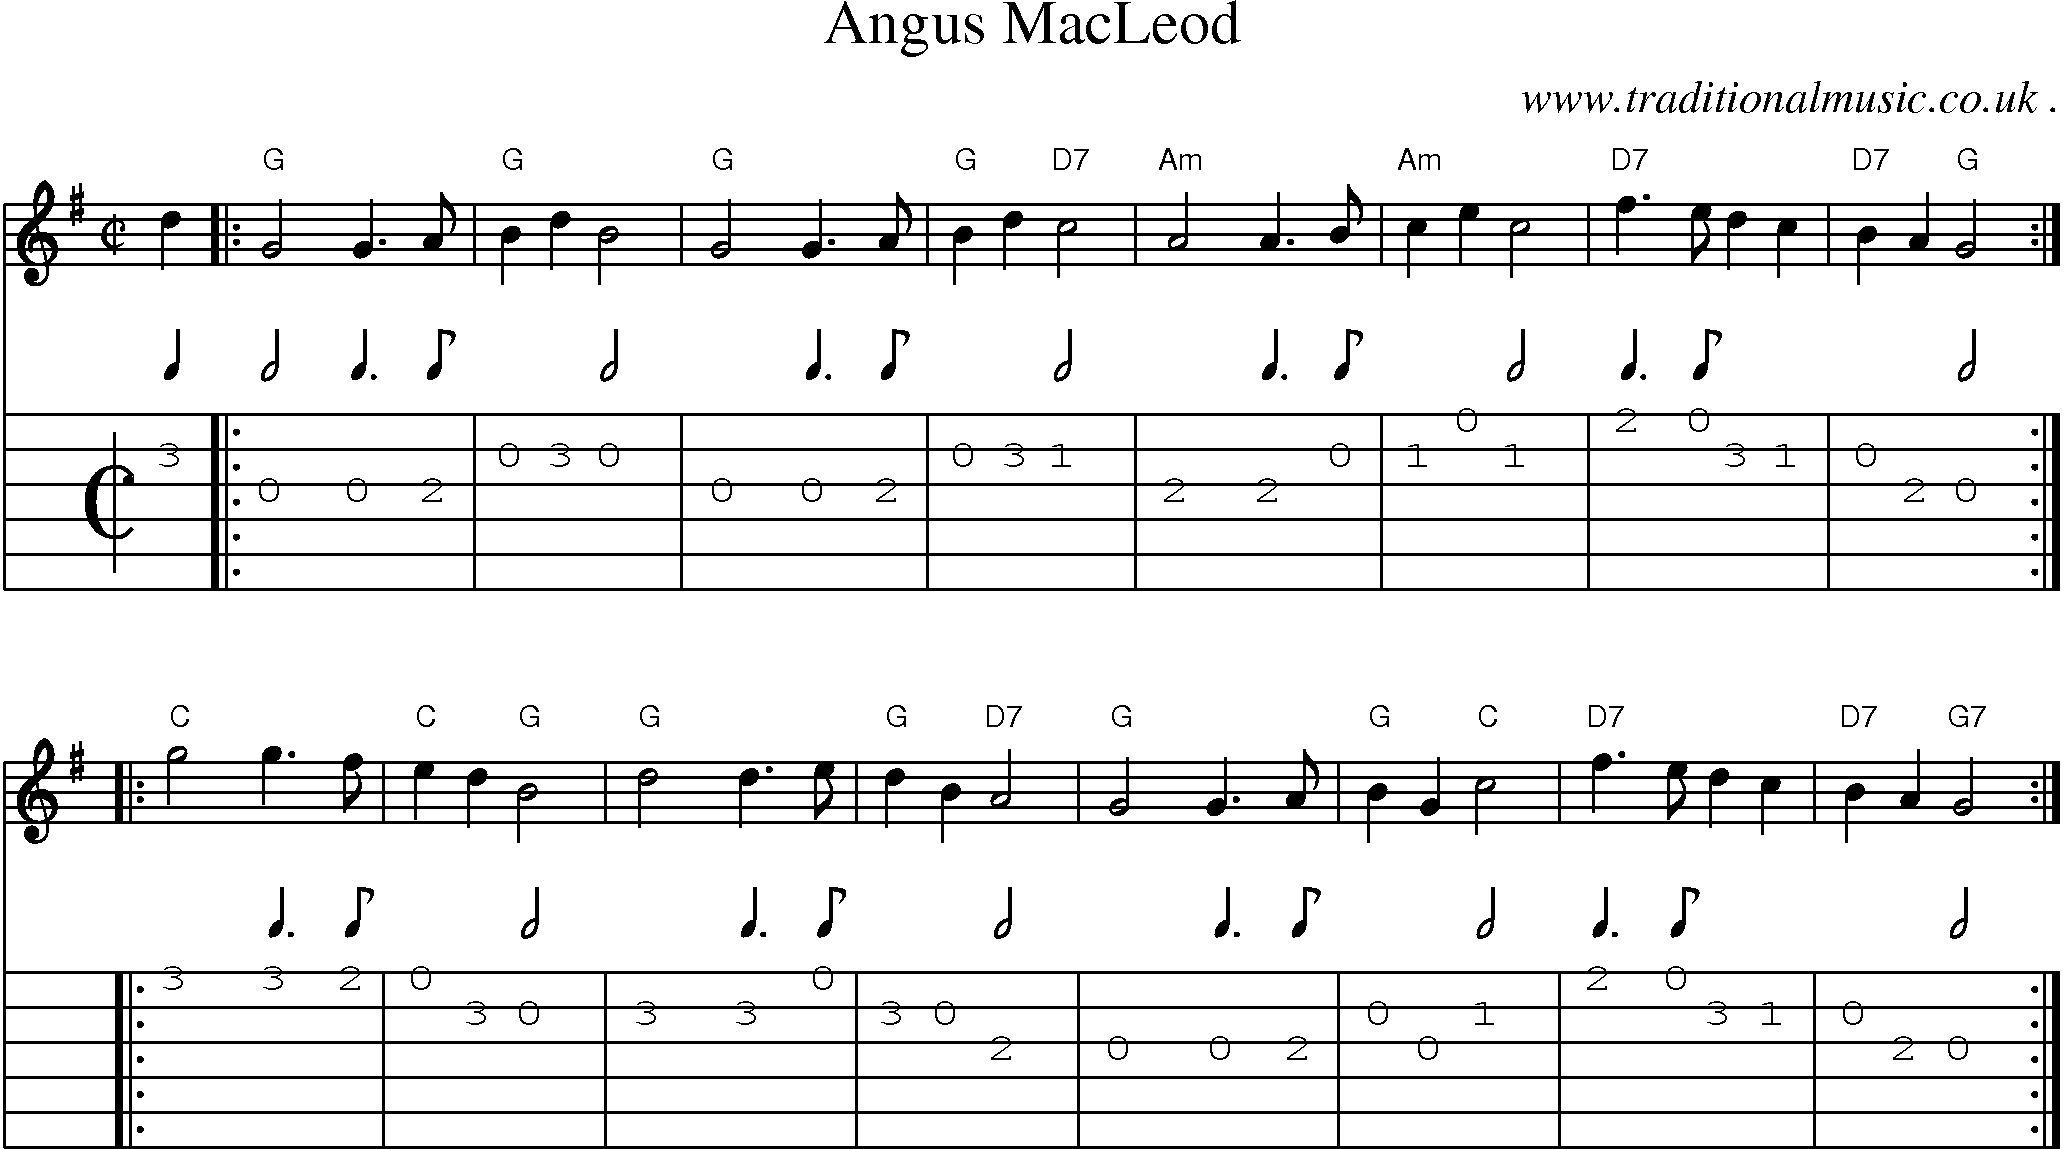 Sheet-music  score, Chords and Guitar Tabs for Angus Macleod